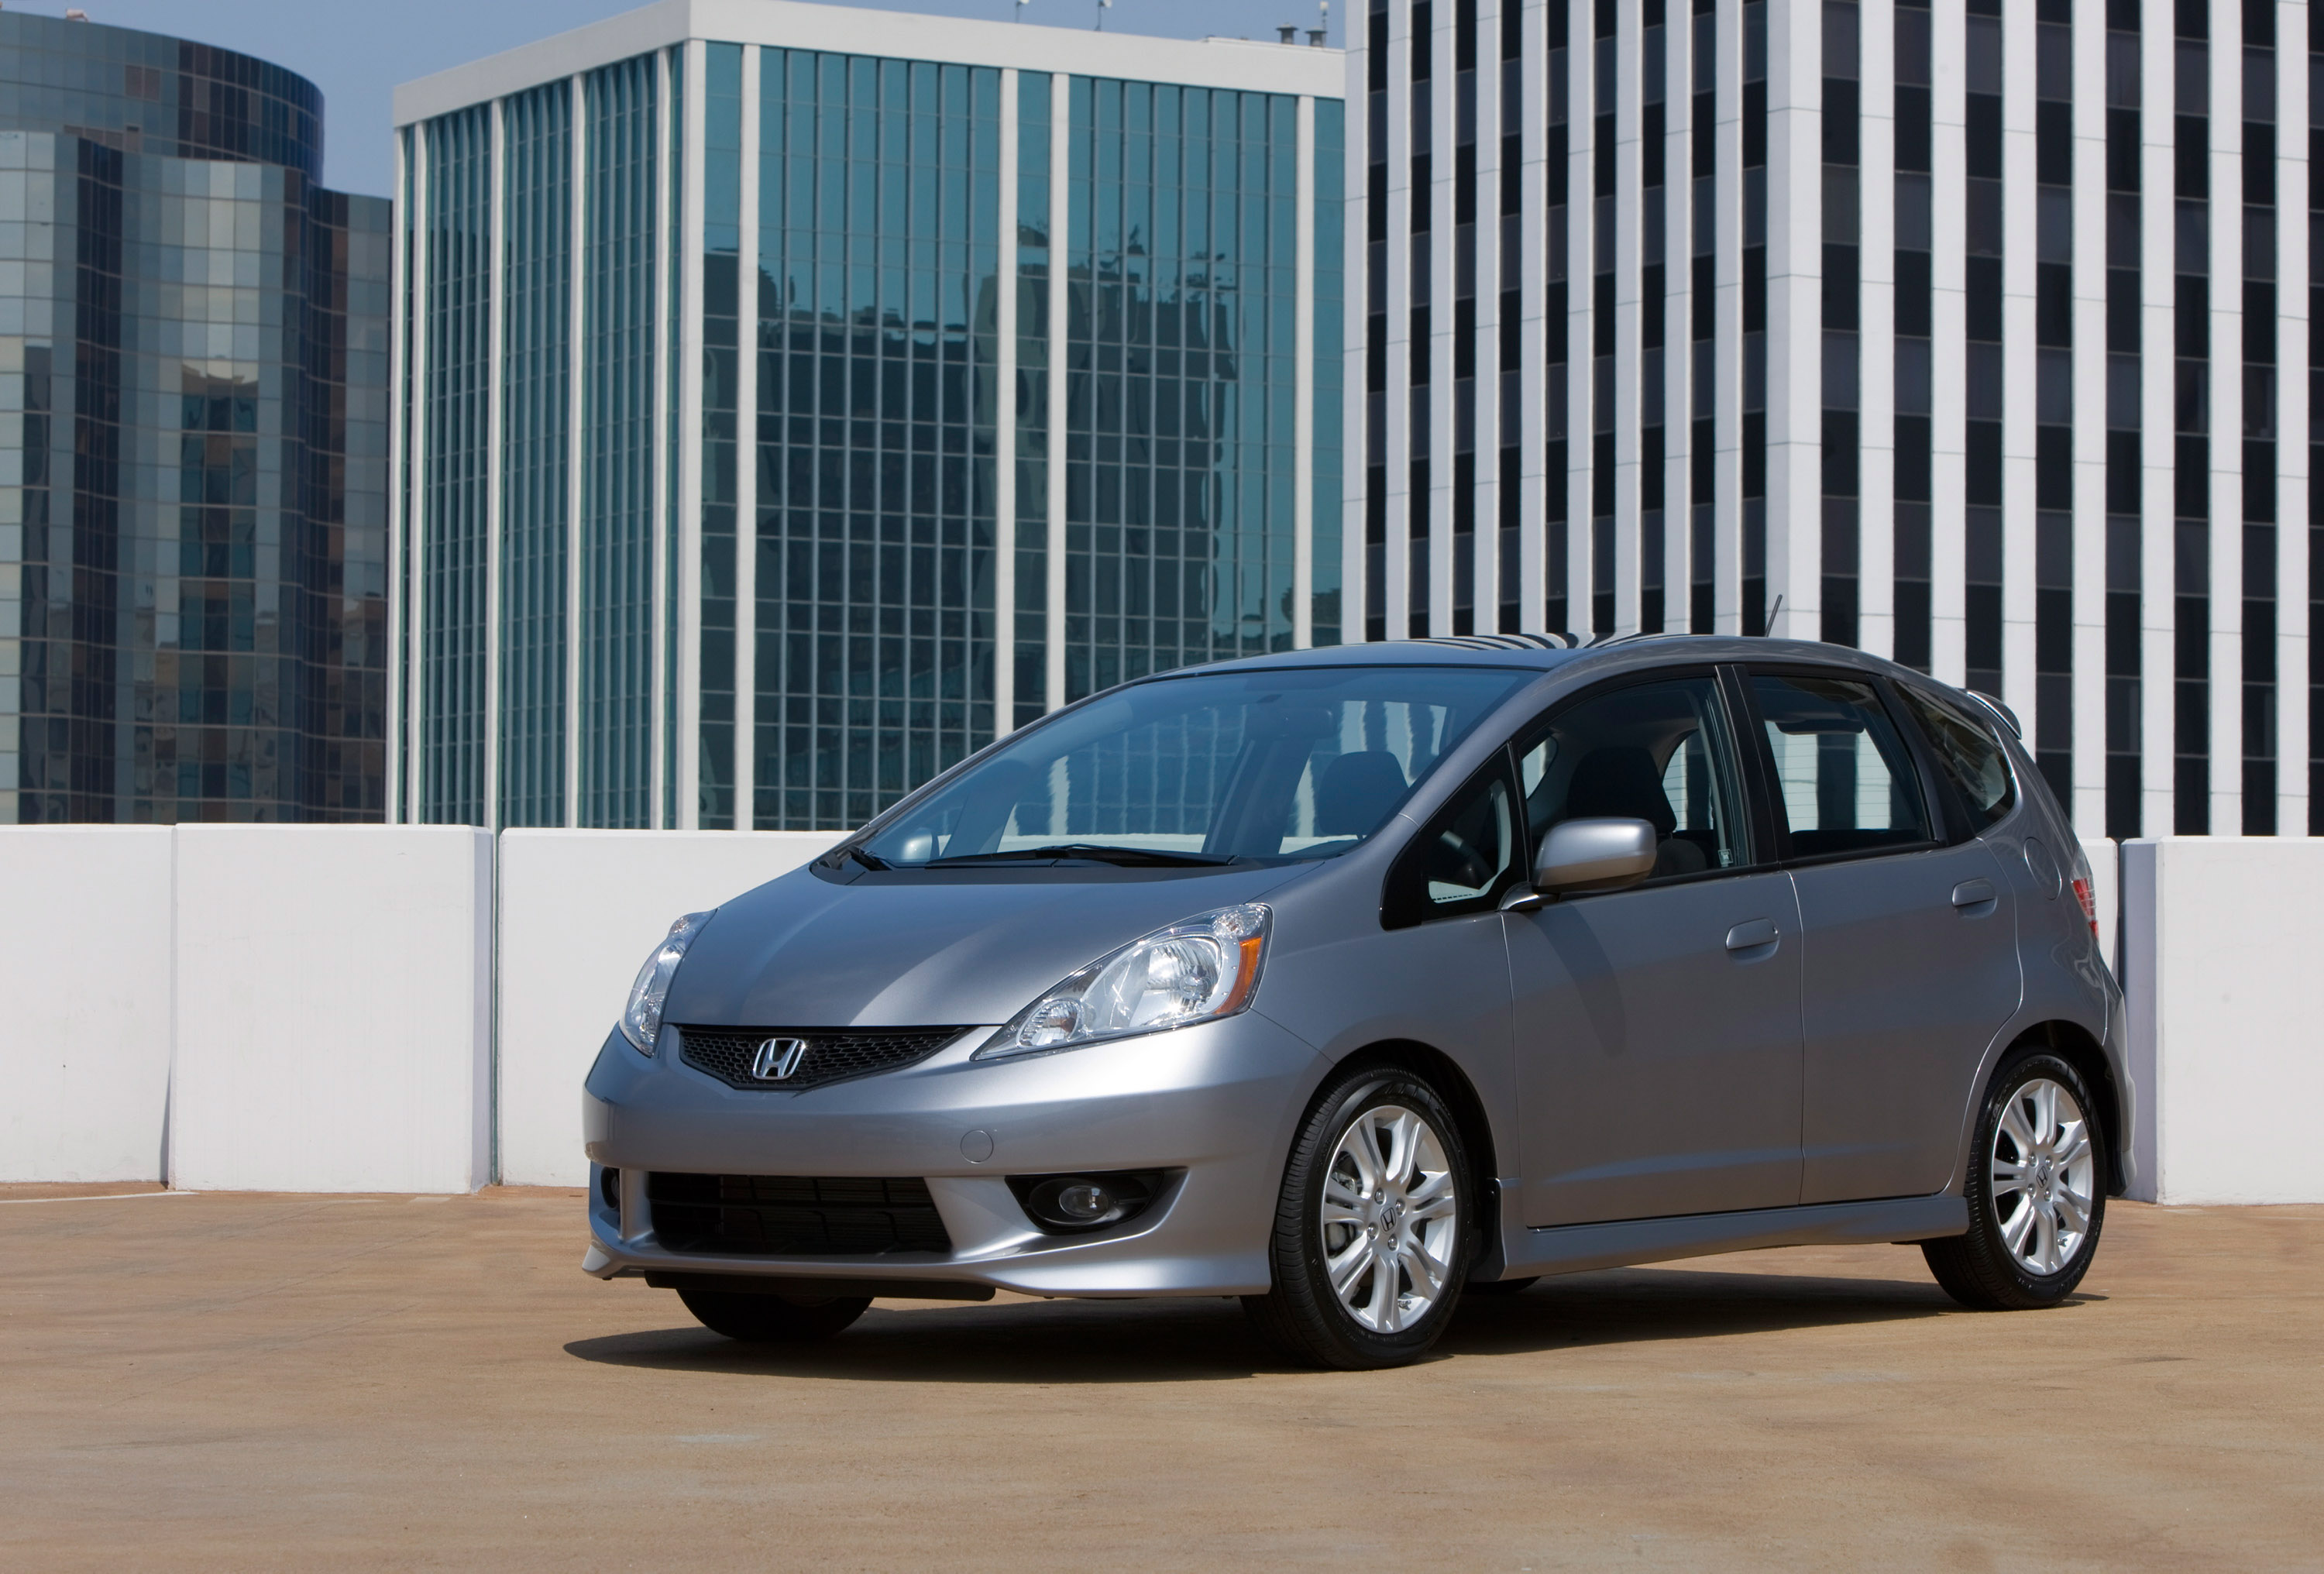 2010 Honda Fit - fits everything